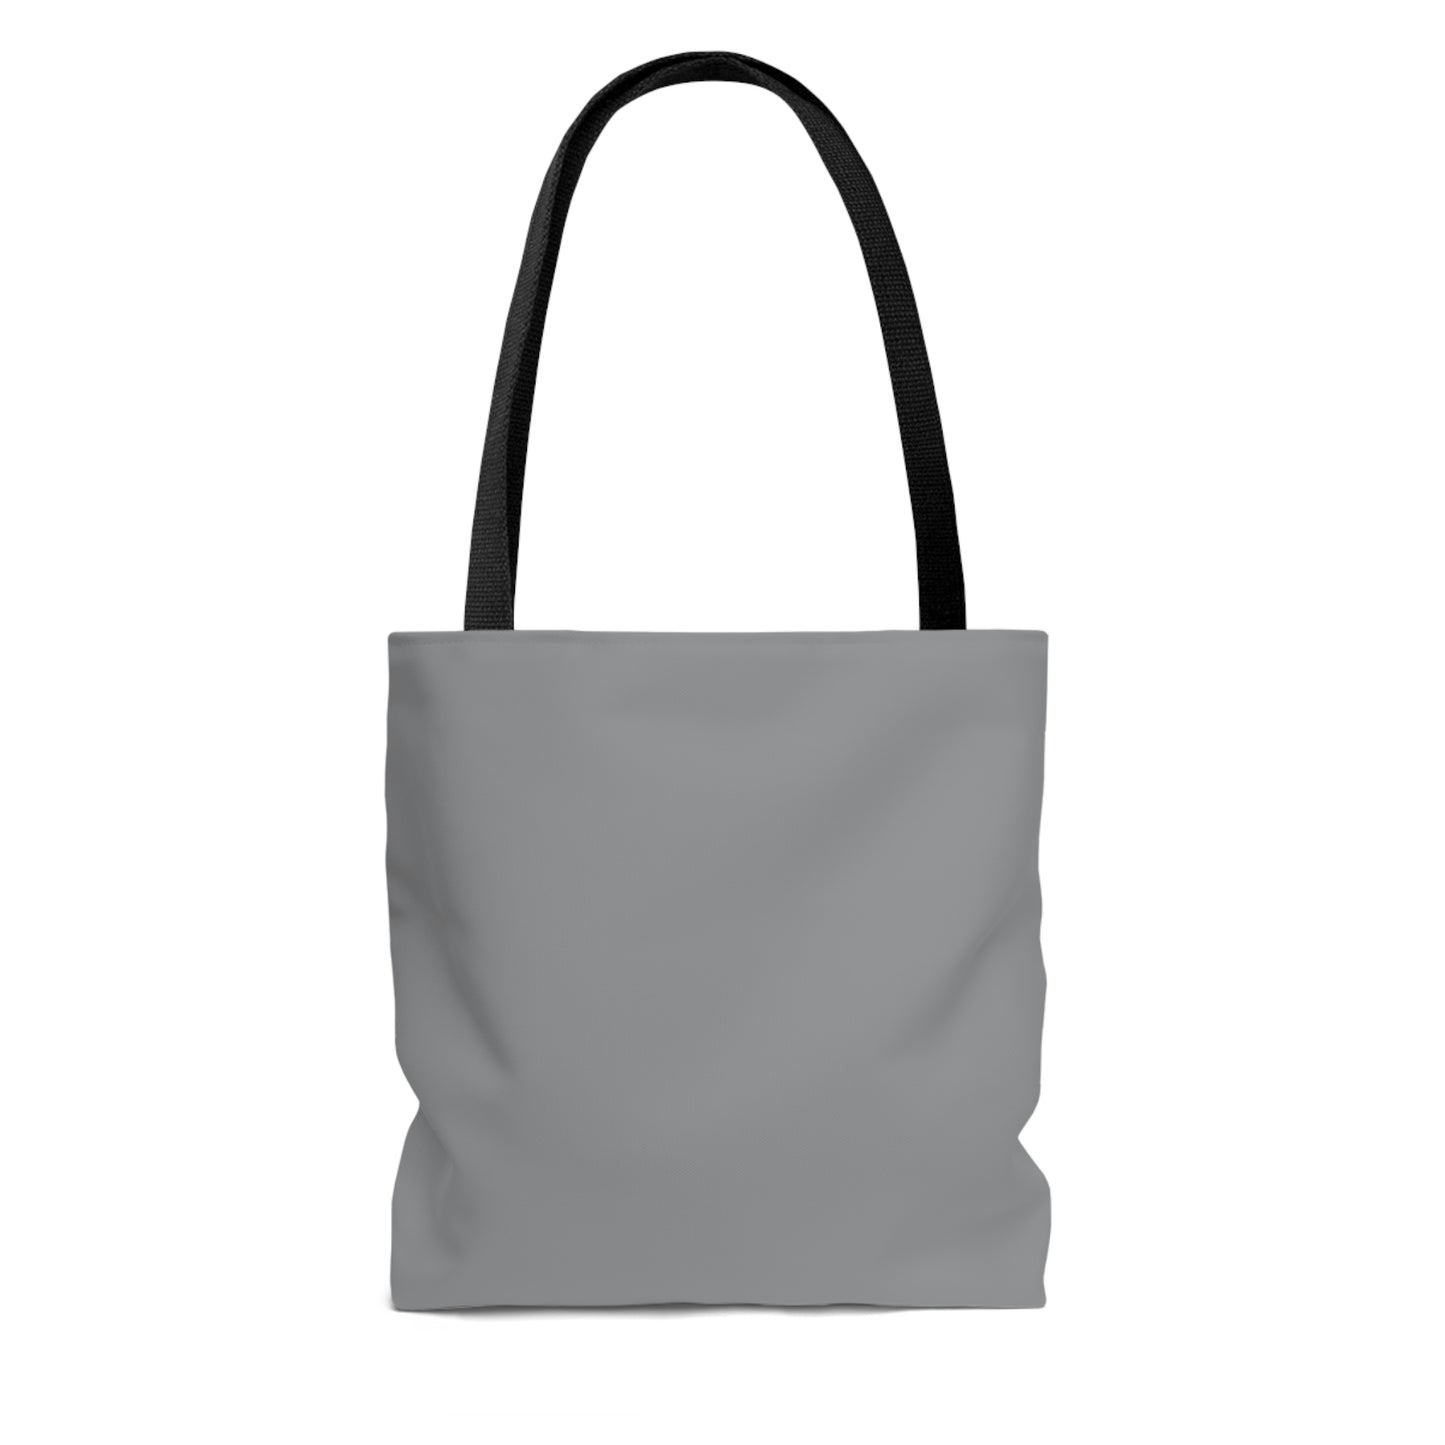 Renewed, Transformed, Claimed By God Tote Bag